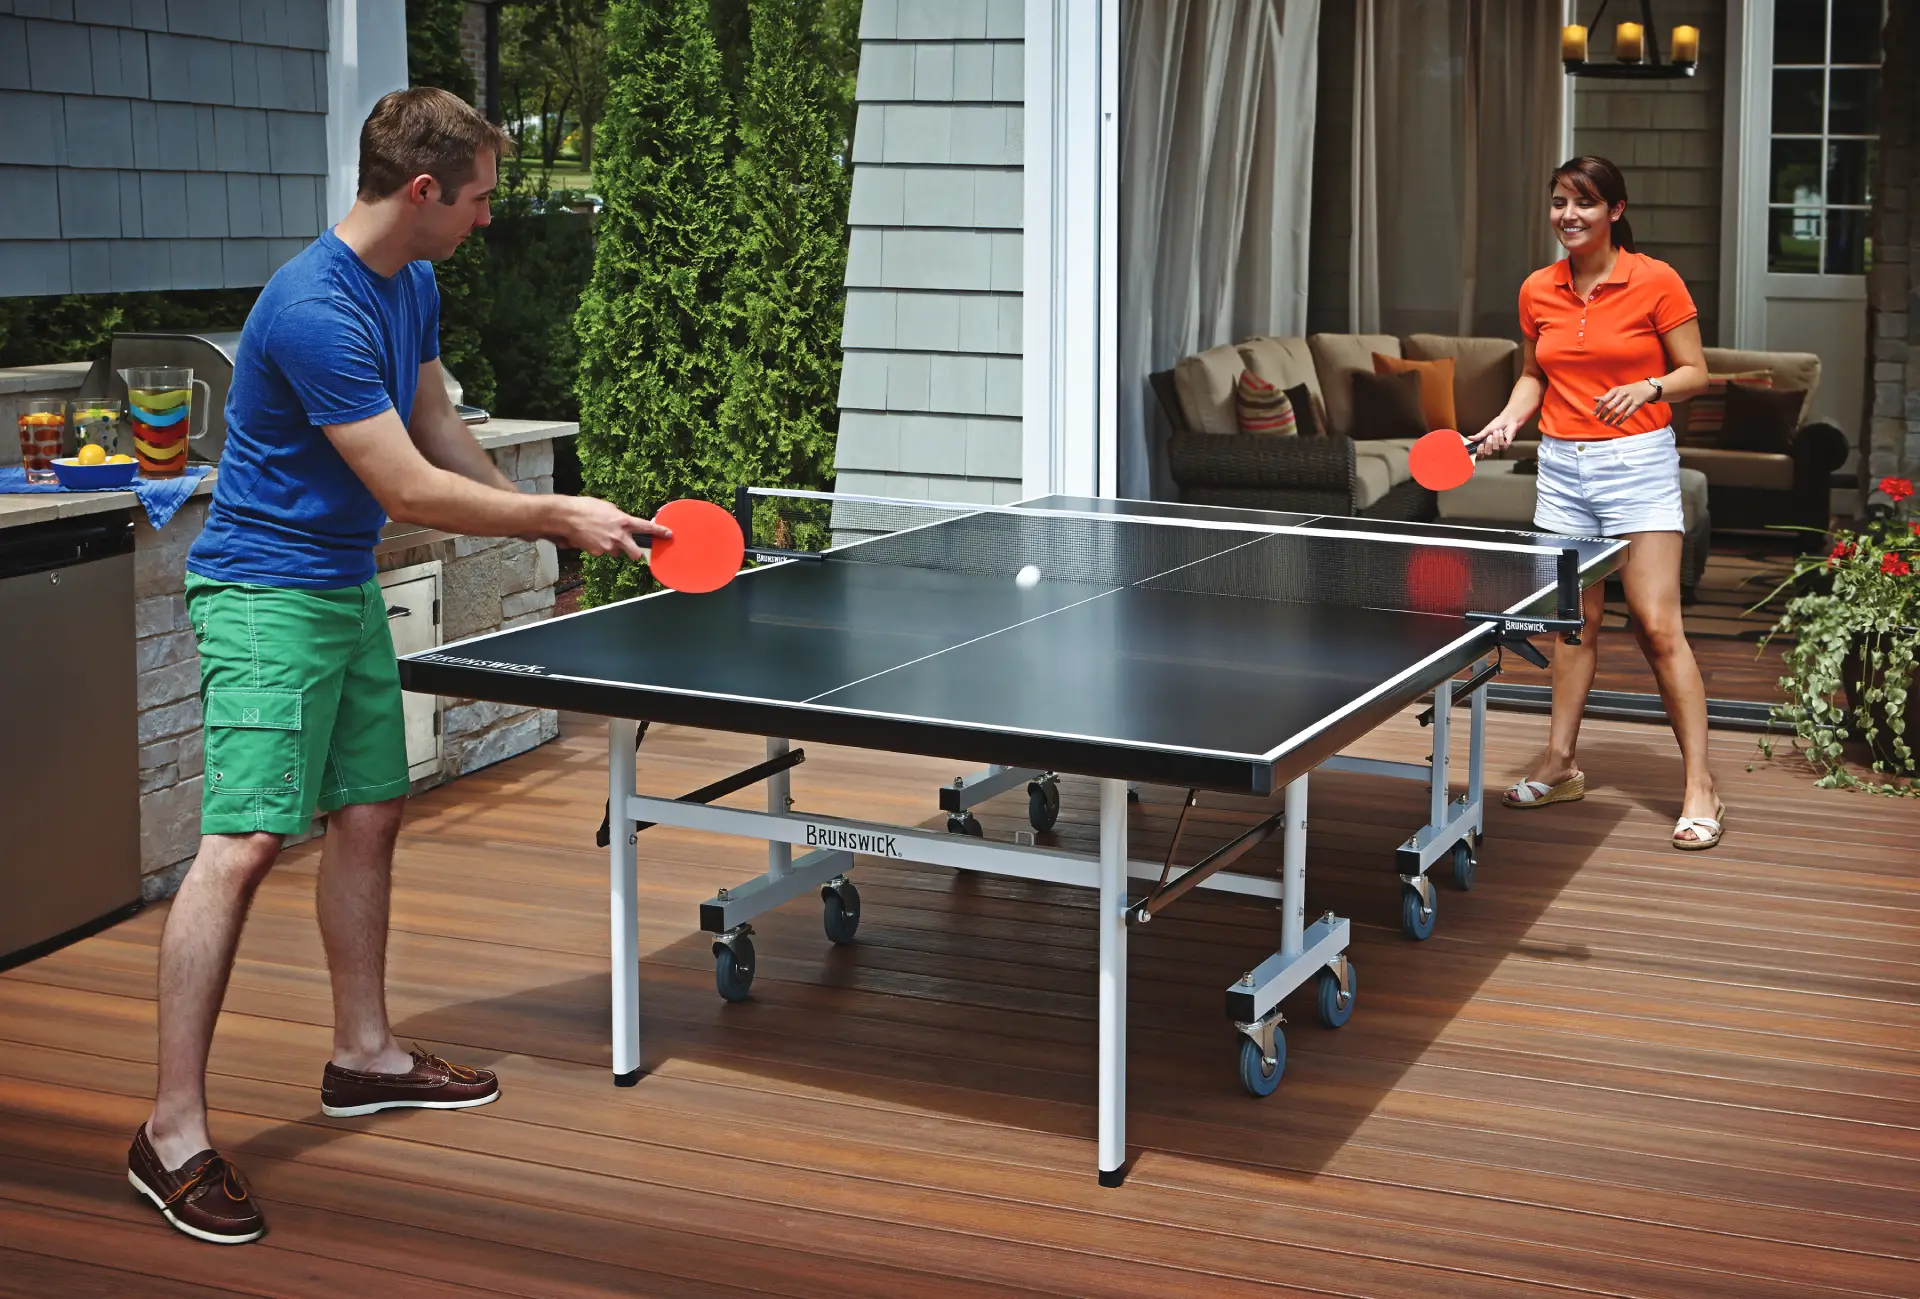 smash 5.0 table tennis in room with model 2